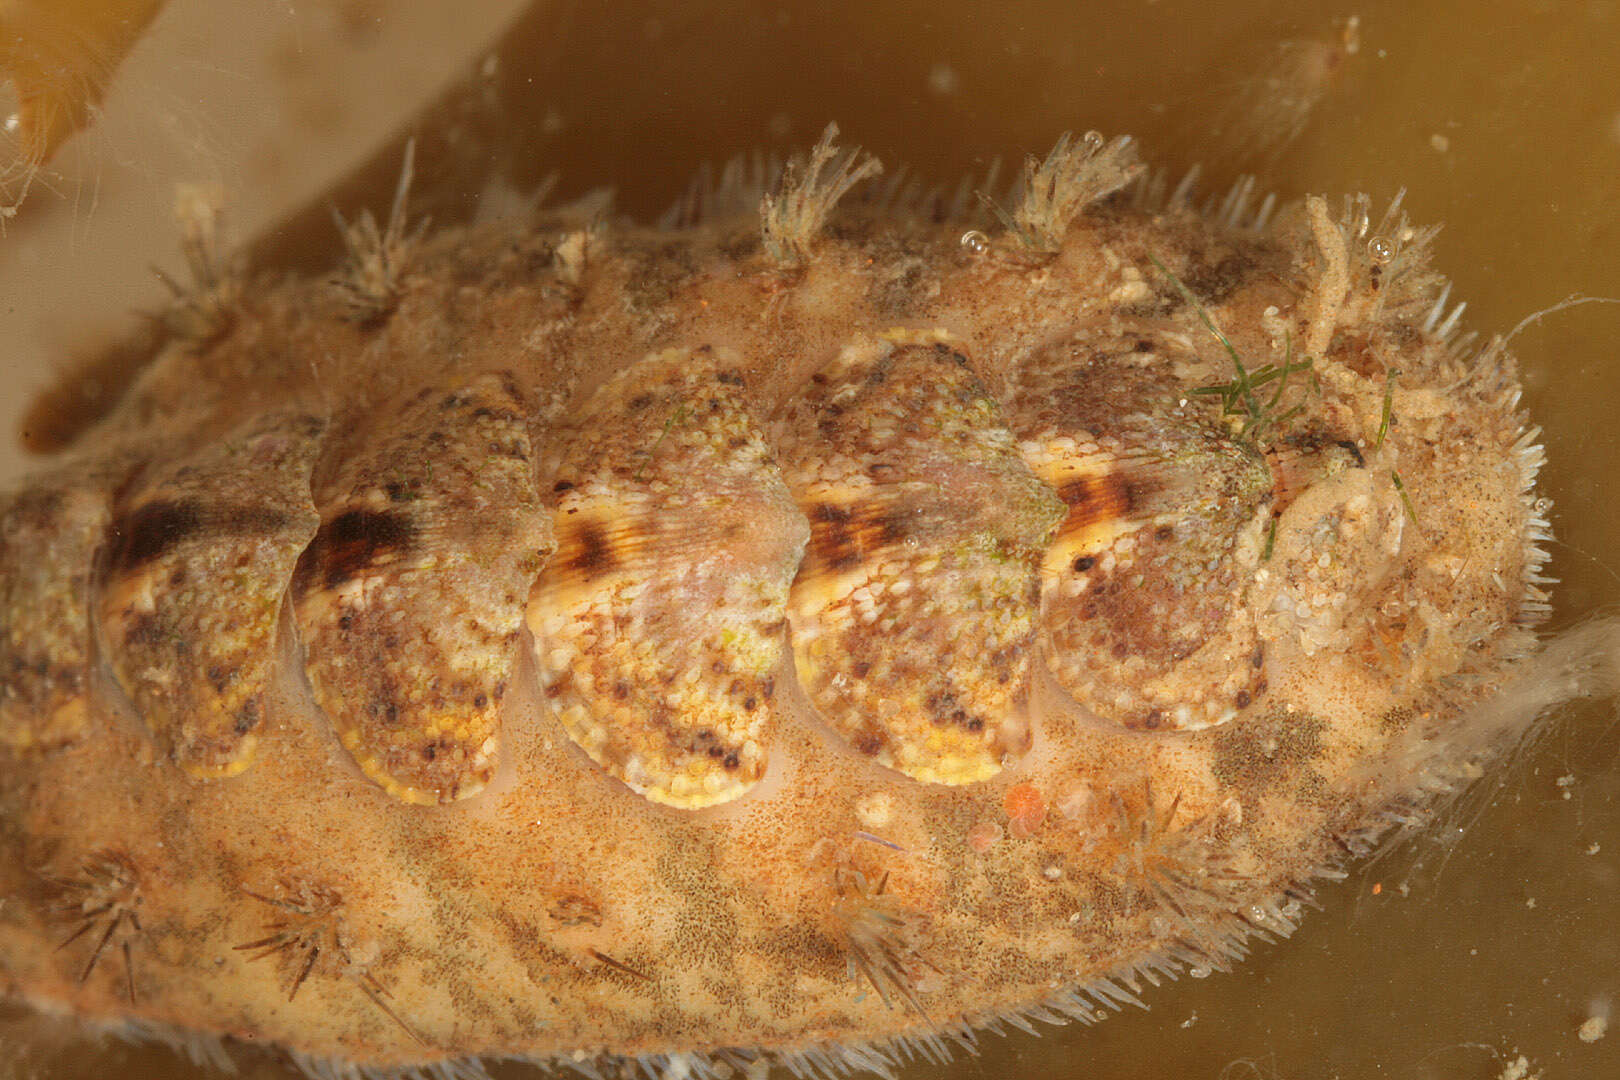 Image of bristly mail chiton